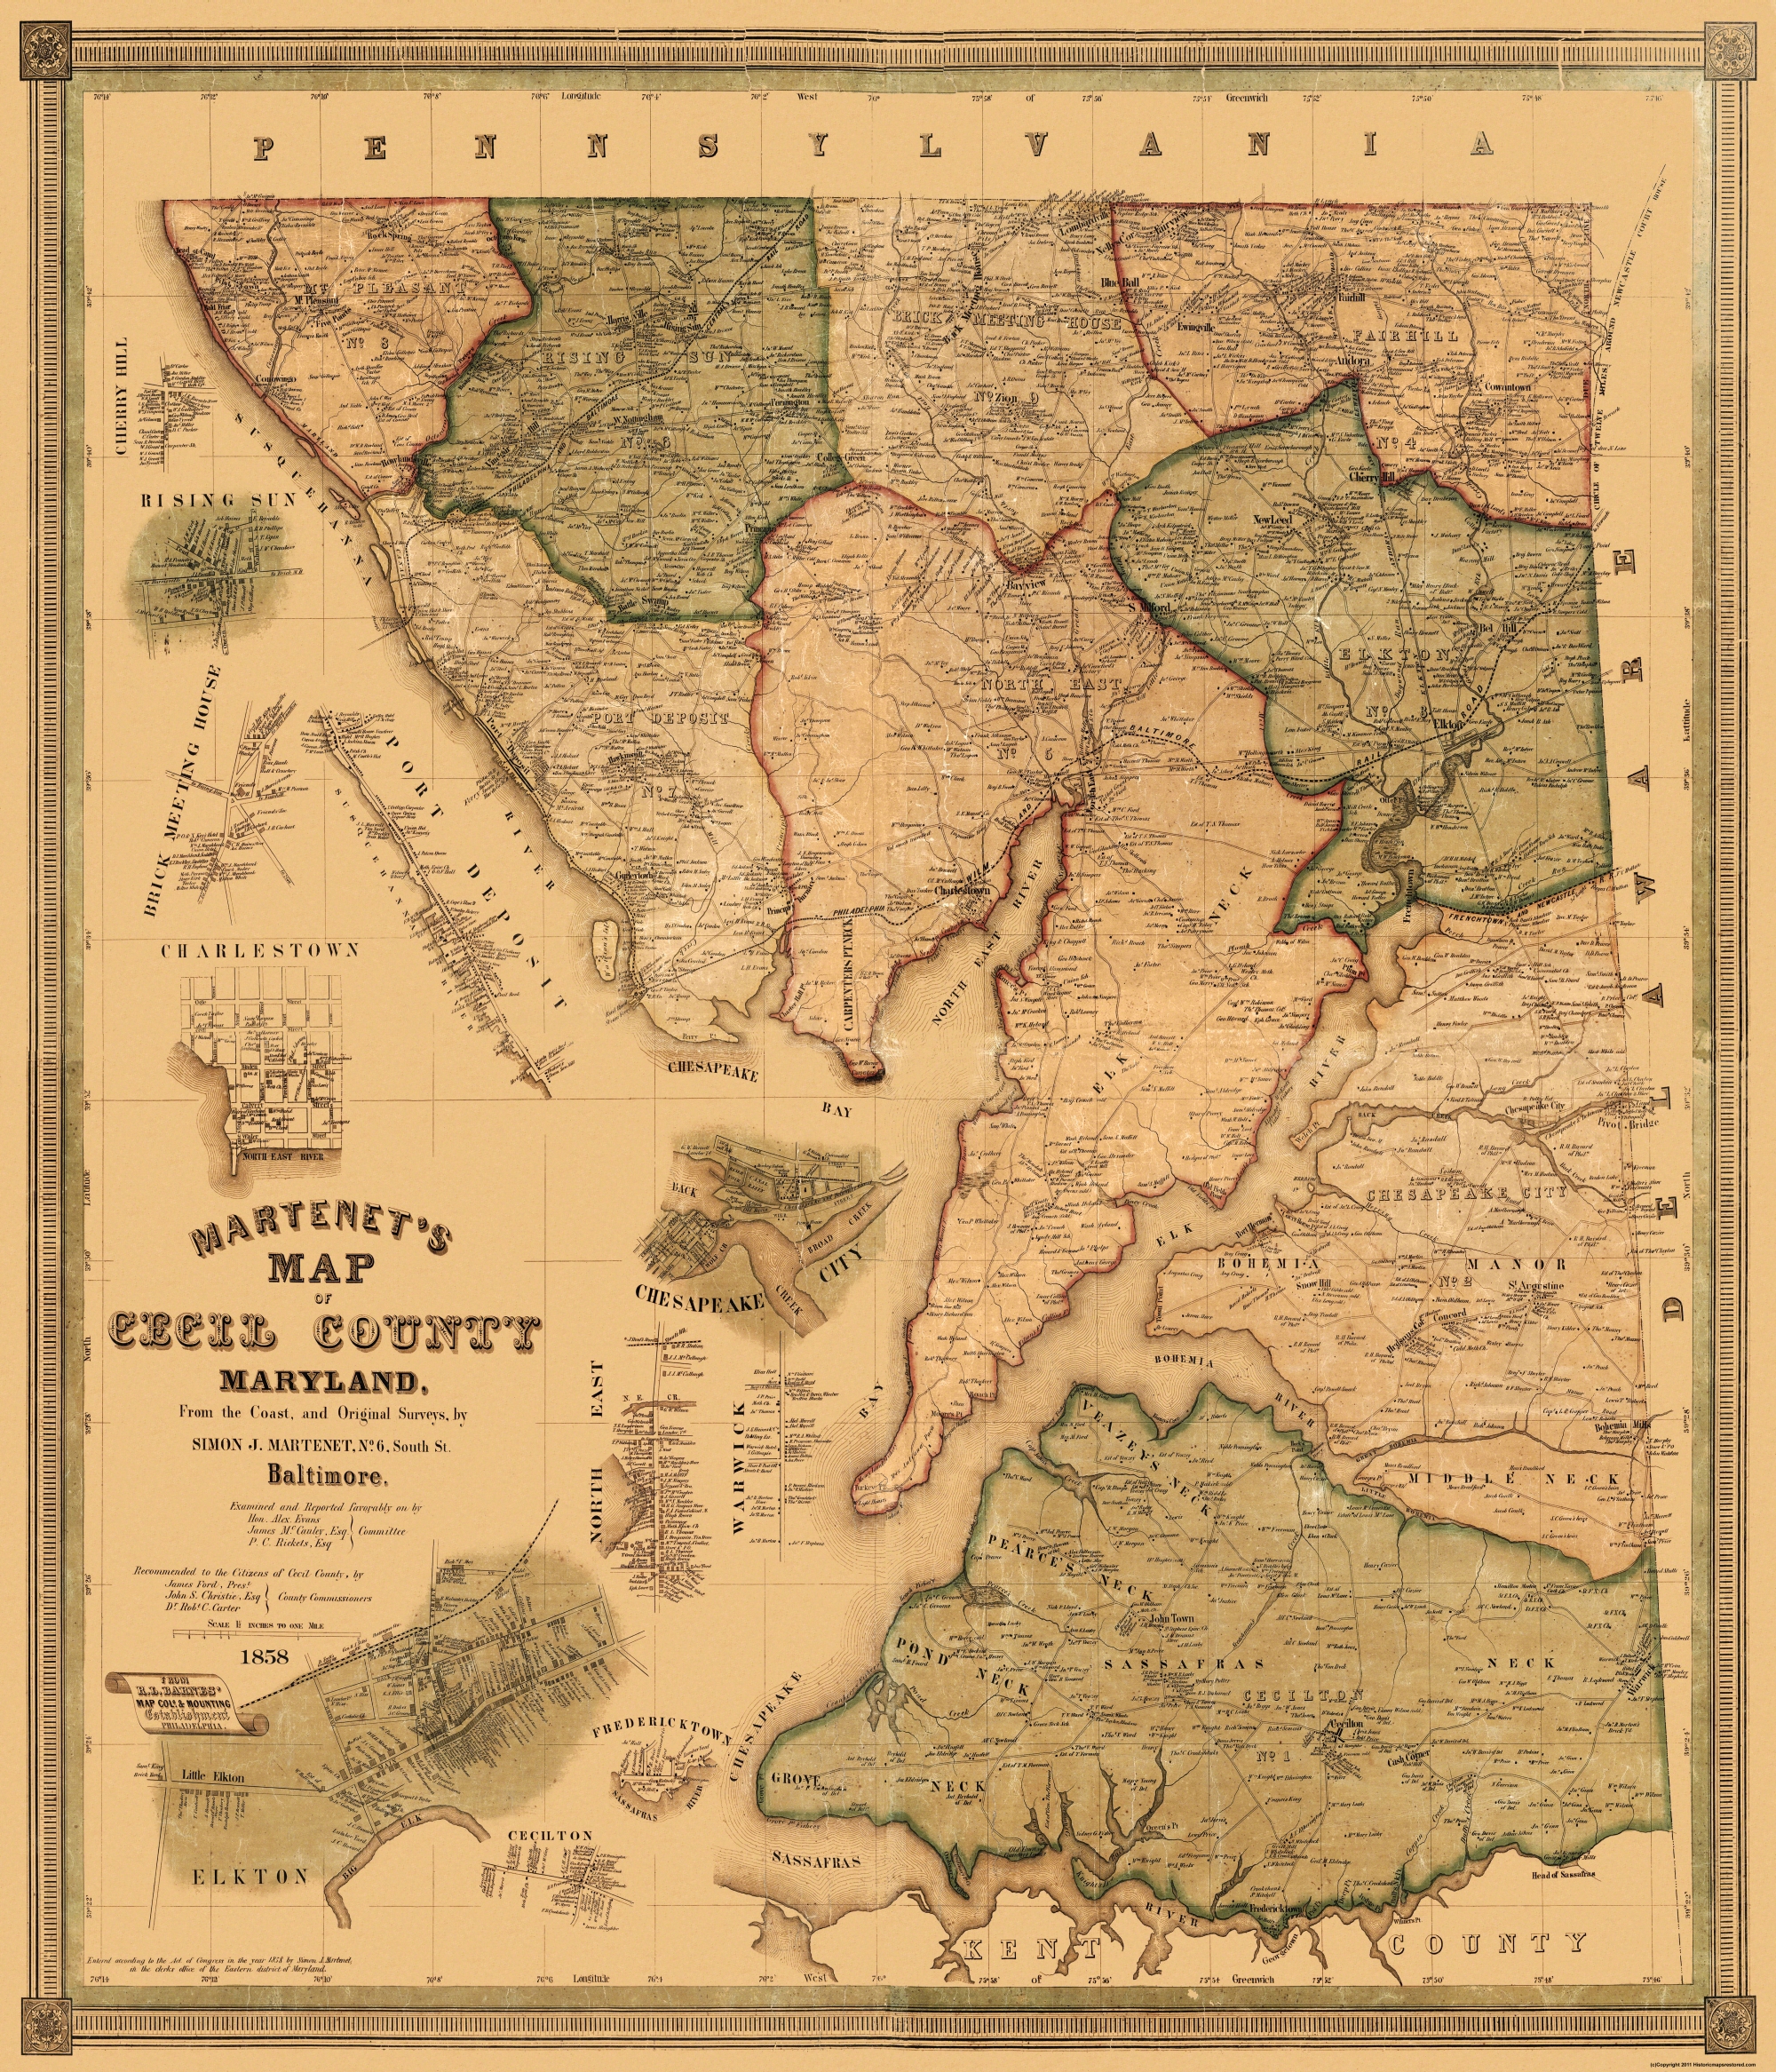 Map of Cecil County Maryland c1858  repro 24x24 